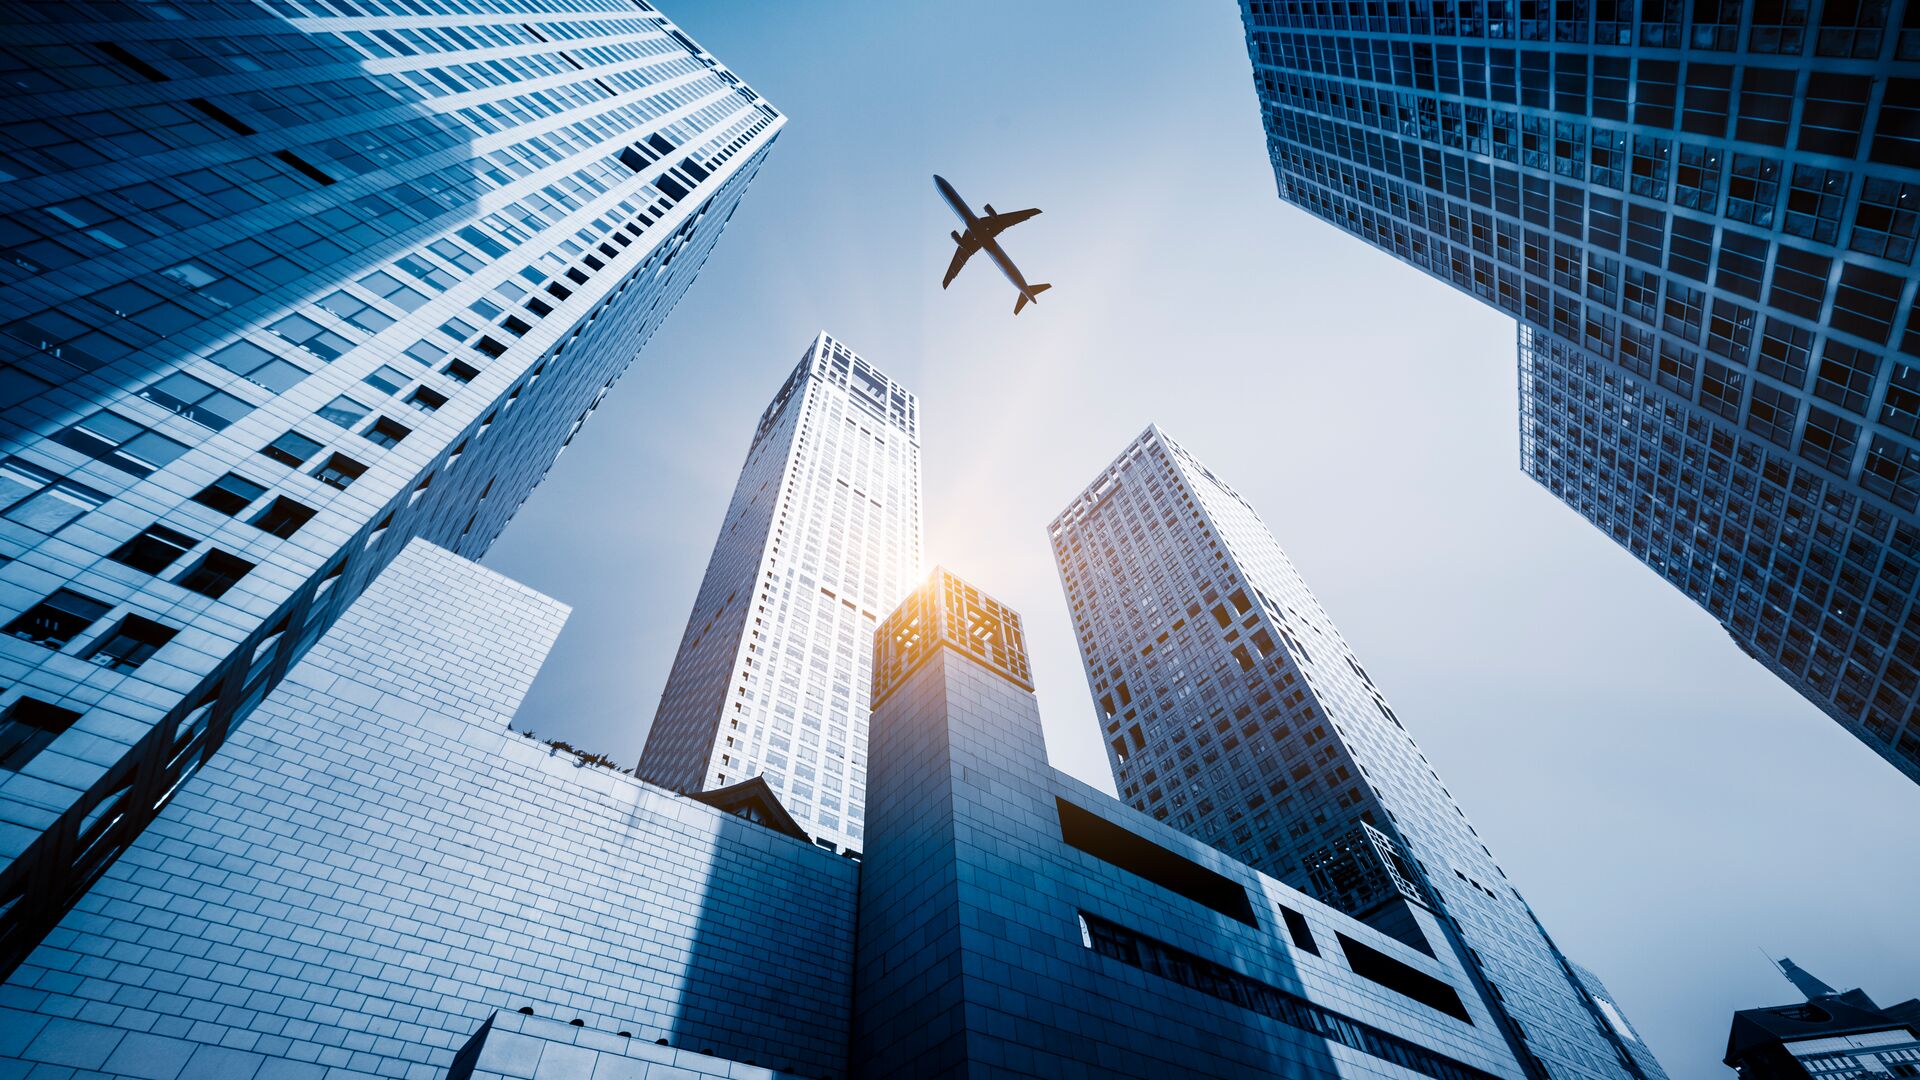 Looking up from the ground on a plane flying over office building in a financial district representing a report on the aftermarket for aerospace and airlines,.